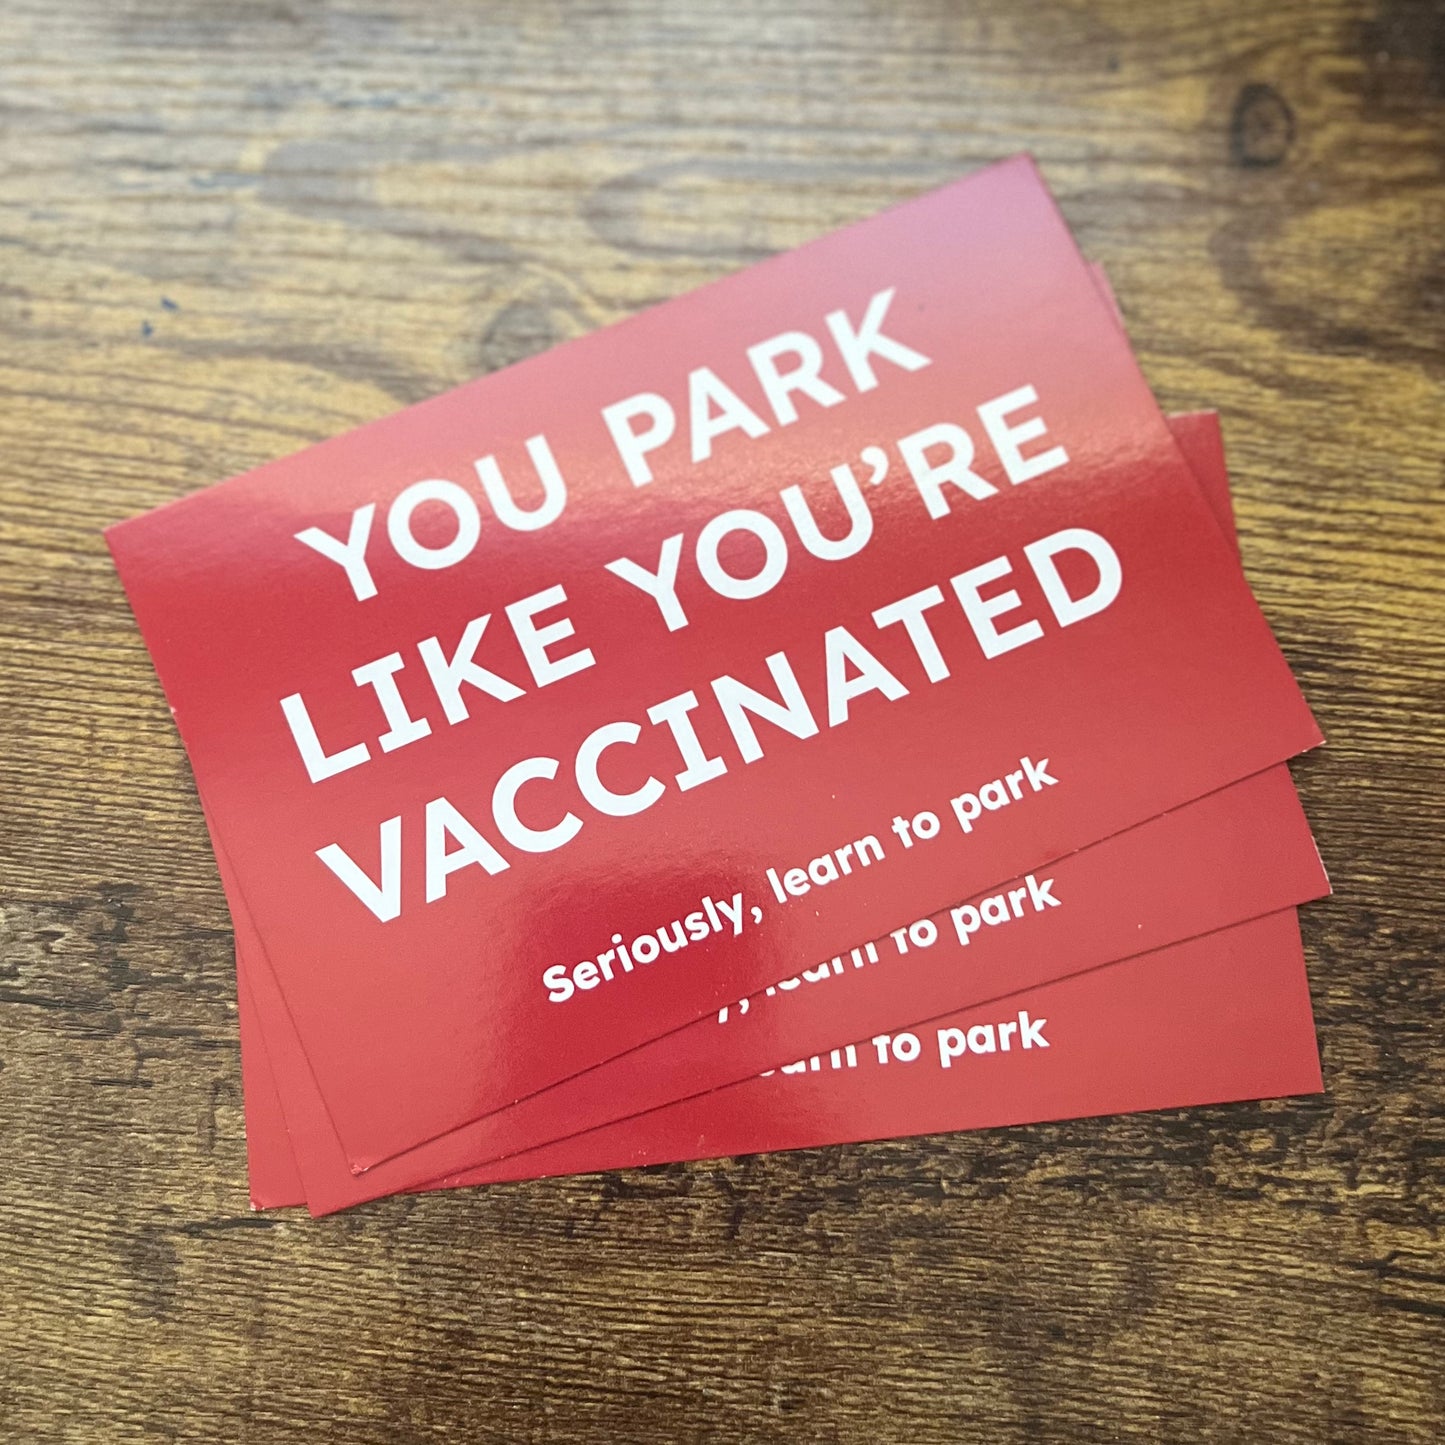 “You Park Like You’re Vaccinated” Parking Notes